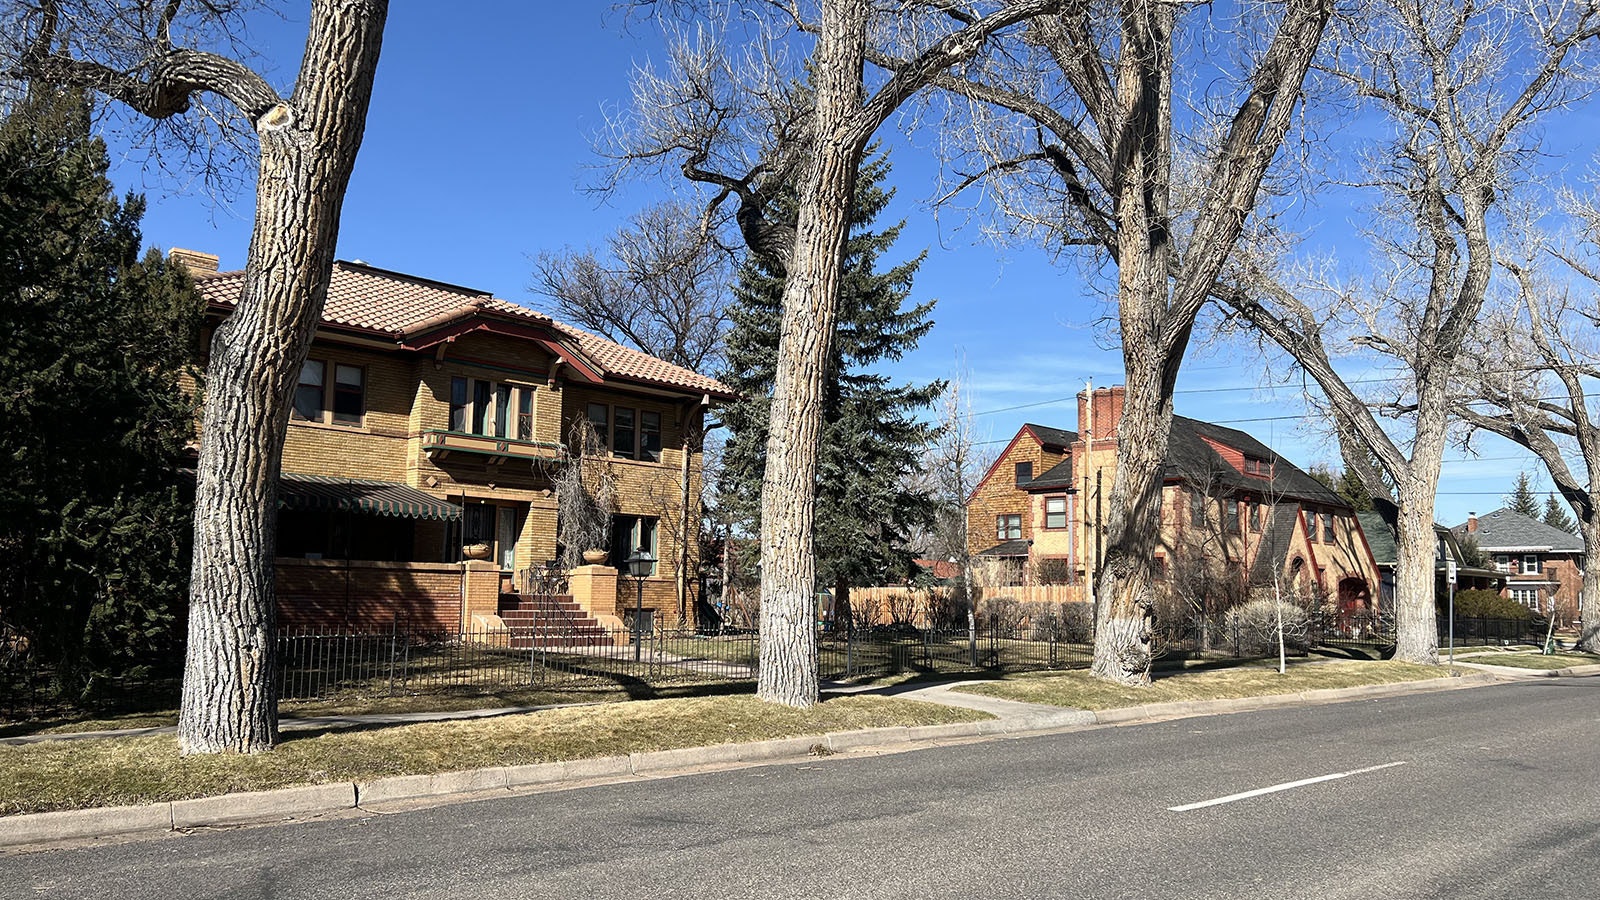 As Wyoming residents and legislators grapple with ballooning property valuations and tax bills, they're not alone. It's happening all over the U.S.